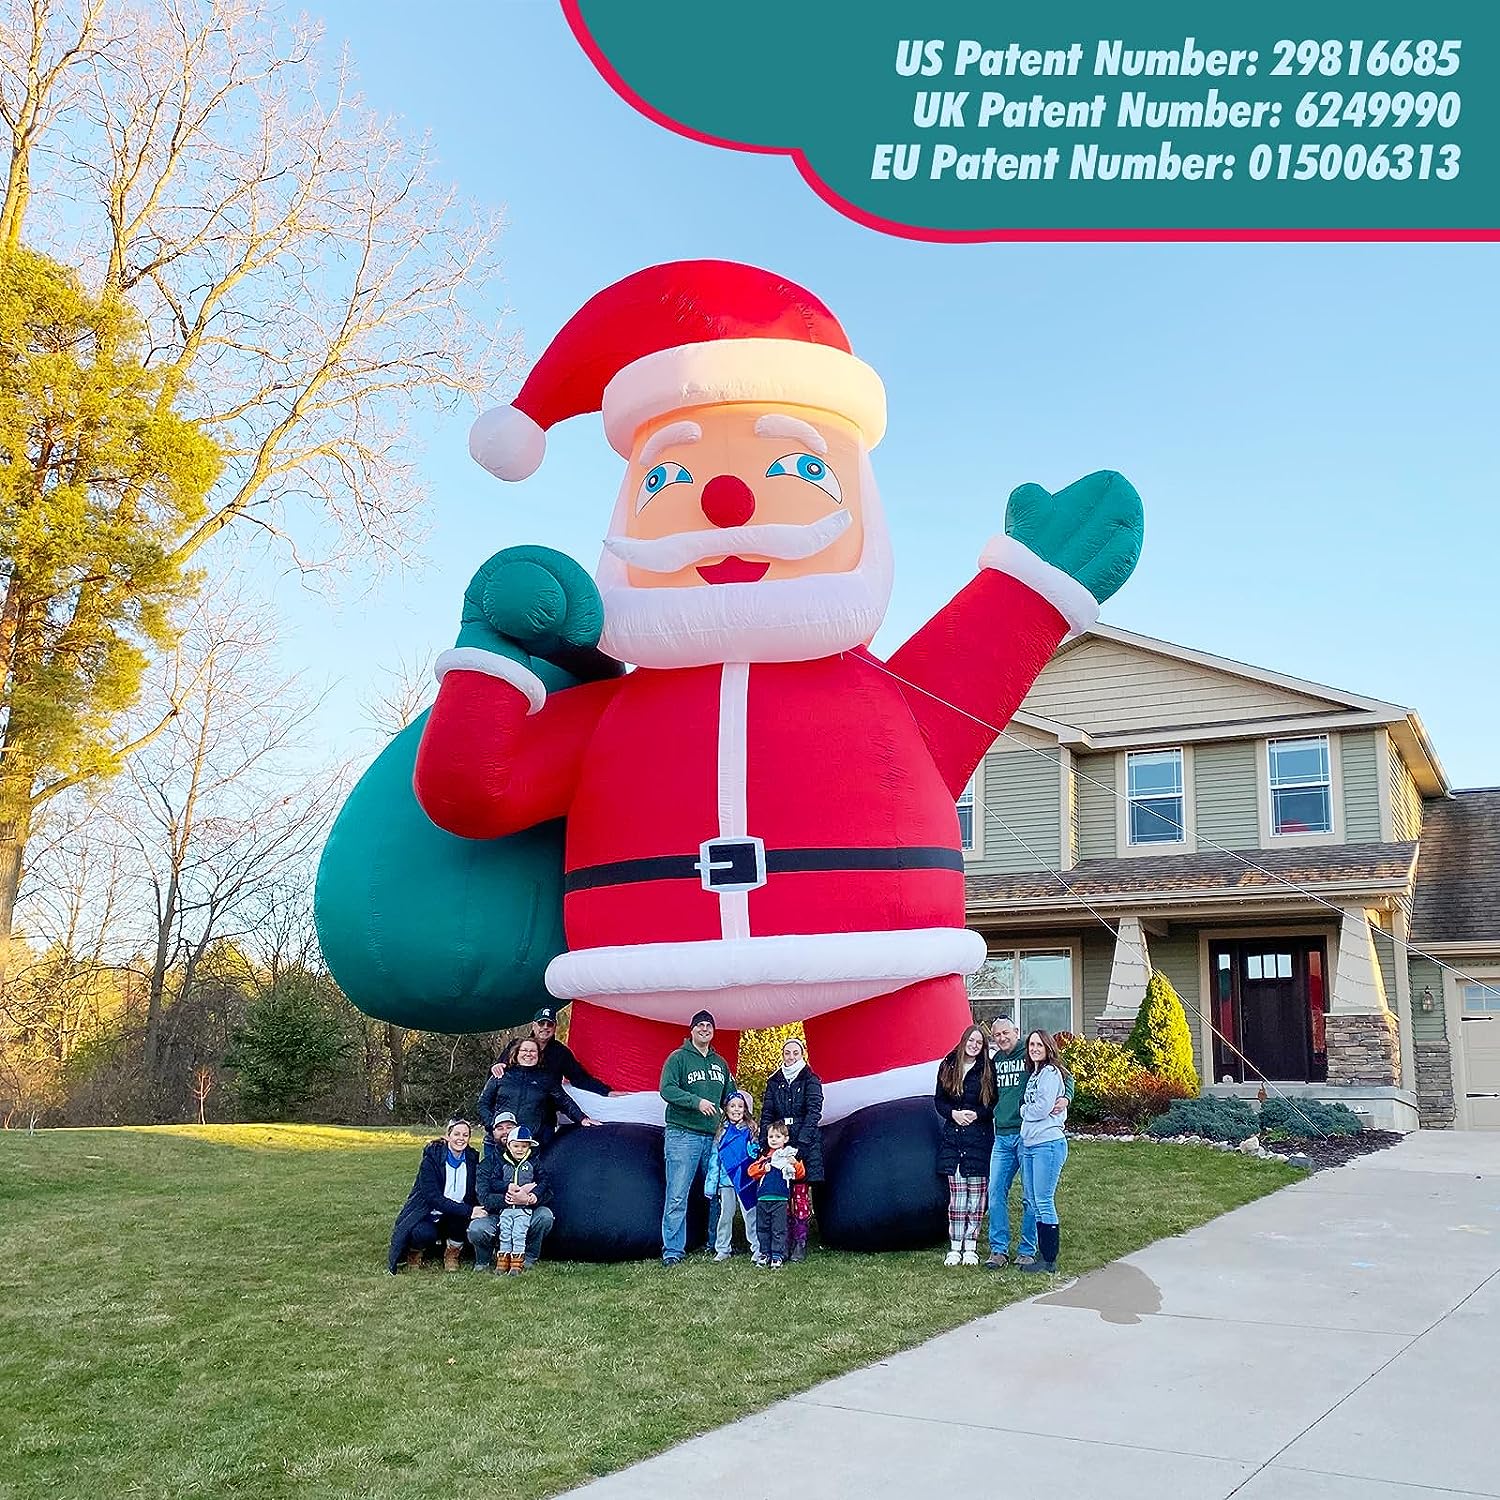 Giant 26Ft Premium Inflatable Santa Claus with Blower for Christmas Yard Decoration Outdoor Yard Lawn Xmas Party Blow Up Decoration with No Light